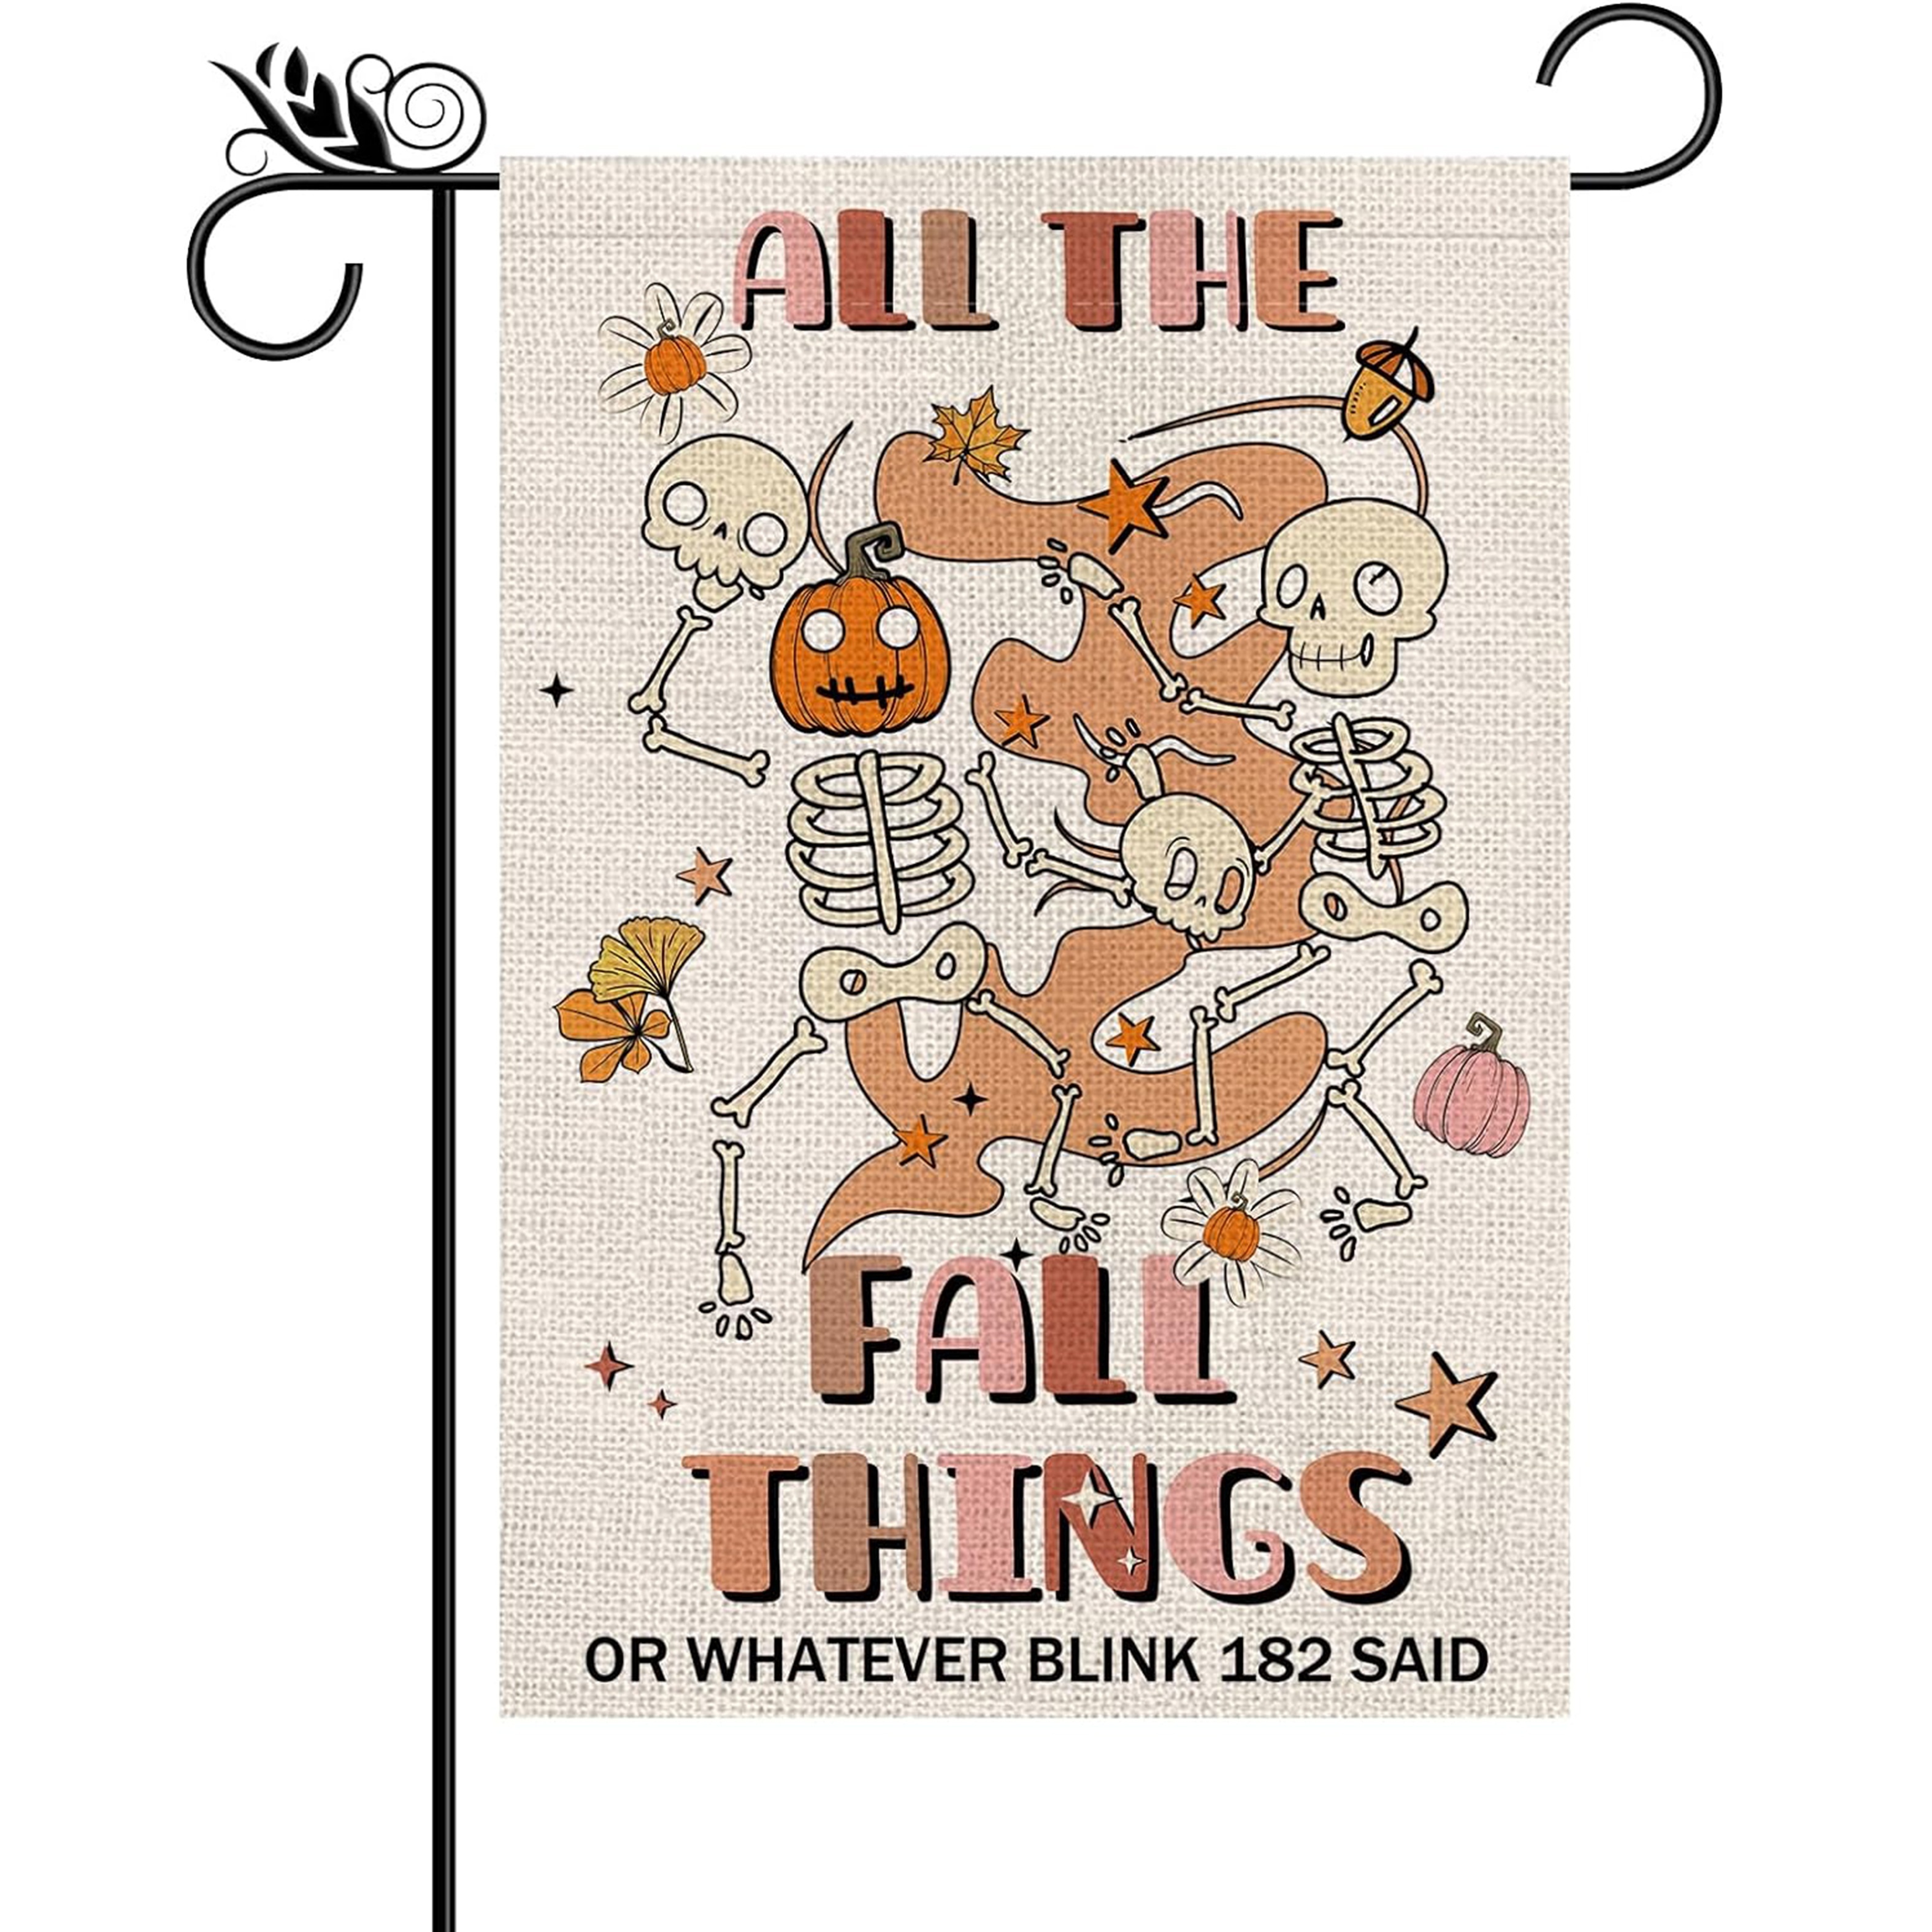 

1pc Rustic Fall Garden Flag With Funny Skeleton & Pumpkin Design, "all The Fall Things" Double-sided Print, Seasonal Autumn Yard & Outdoor Decor, Country Style (flag Only)